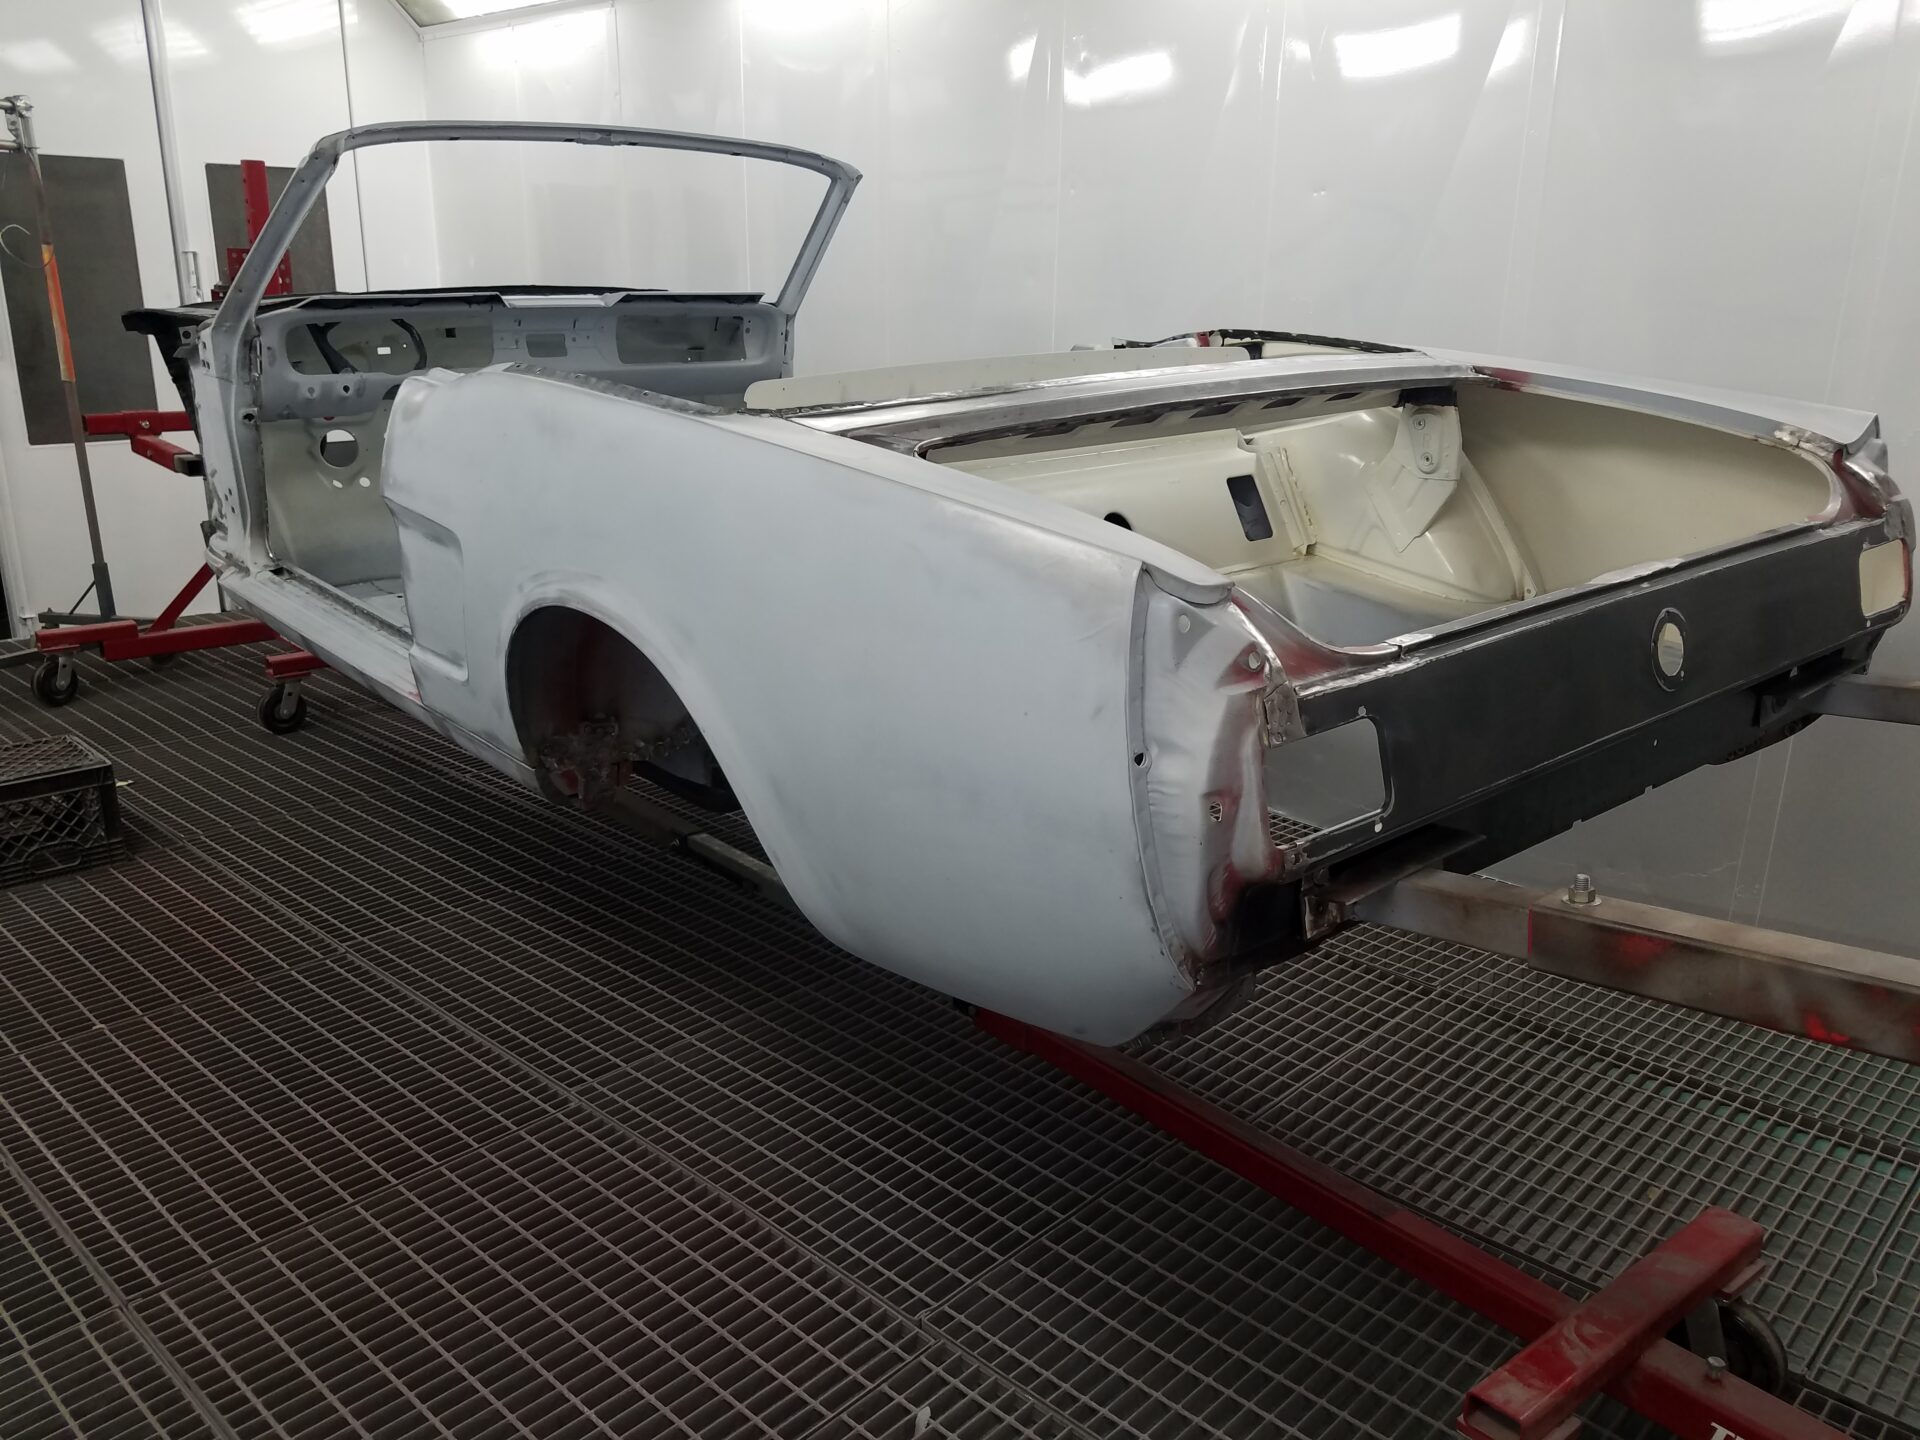 A 1966 Ford Mustang Convertible frame going for a paint job